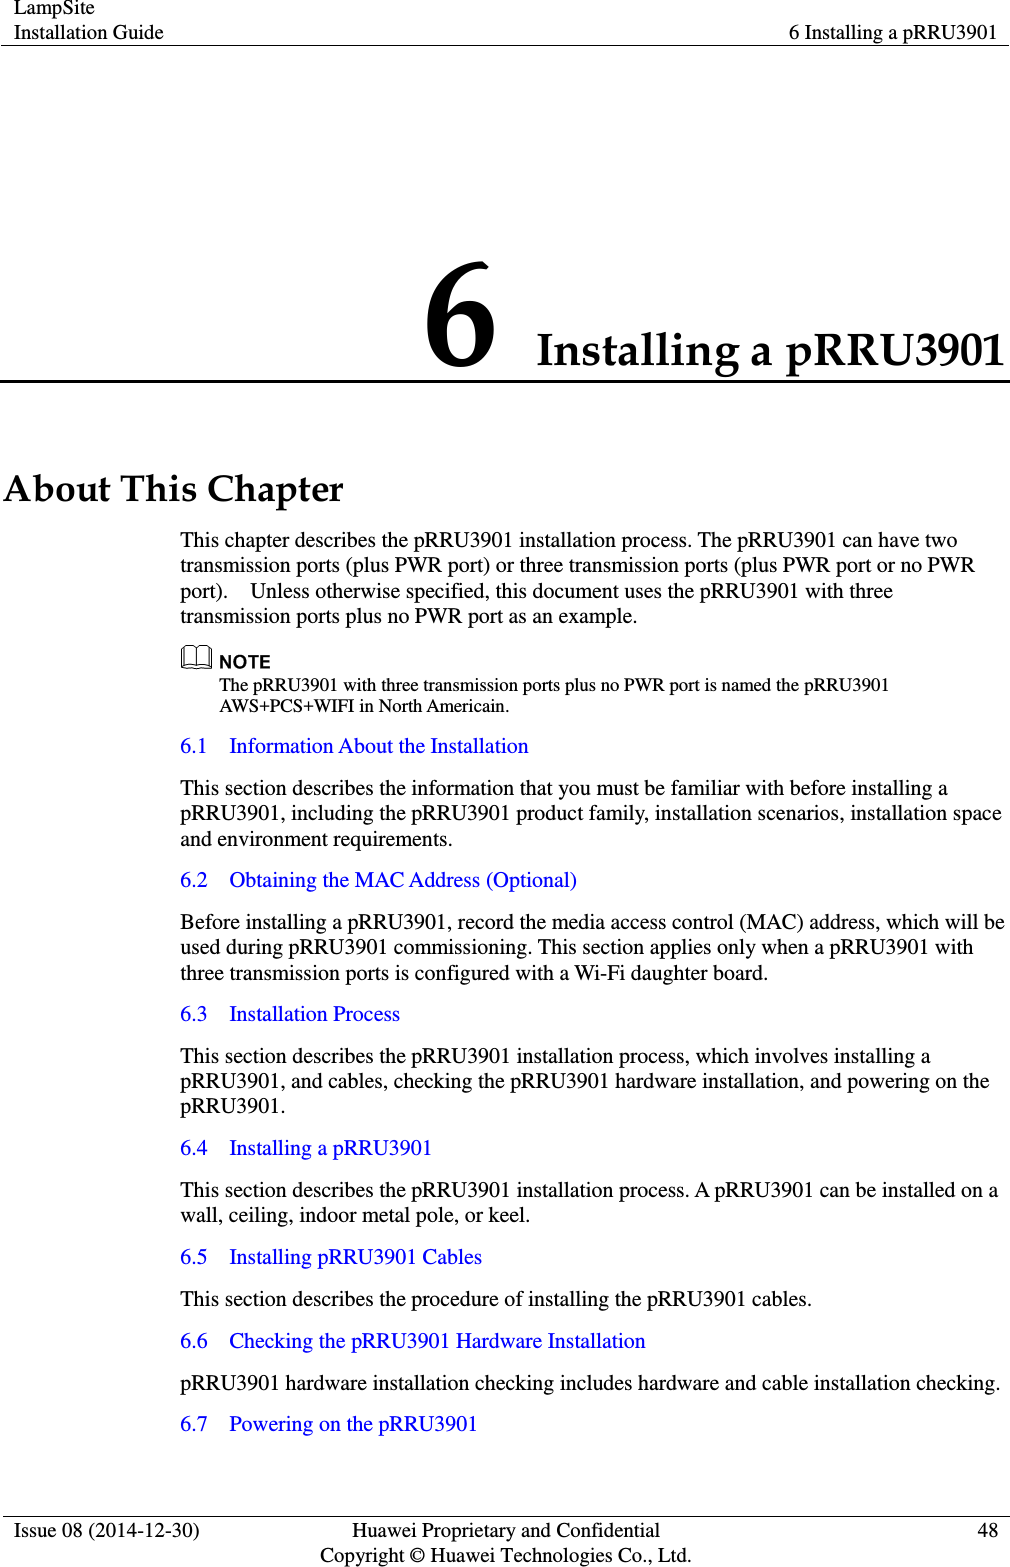 LampSite Installation Guide 6 Installing a pRRU3901  Issue 08 (2014-12-30) Huawei Proprietary and Confidential                                     Copyright © Huawei Technologies Co., Ltd. 48  6 Installing a pRRU3901 About This Chapter This chapter describes the pRRU3901 installation process. The pRRU3901 can have two transmission ports (plus PWR port) or three transmission ports (plus PWR port or no PWR port).    Unless otherwise specified, this document uses the pRRU3901 with three transmission ports plus no PWR port as an example.  The pRRU3901 with three transmission ports plus no PWR port is named the pRRU3901 AWS+PCS+WIFI in North Americain. 6.1    Information About the Installation This section describes the information that you must be familiar with before installing a pRRU3901, including the pRRU3901 product family, installation scenarios, installation space and environment requirements. 6.2    Obtaining the MAC Address (Optional)   Before installing a pRRU3901, record the media access control (MAC) address, which will be used during pRRU3901 commissioning. This section applies only when a pRRU3901 with three transmission ports is configured with a Wi-Fi daughter board. 6.3    Installation Process This section describes the pRRU3901 installation process, which involves installing a pRRU3901, and cables, checking the pRRU3901 hardware installation, and powering on the pRRU3901.   6.4    Installing a pRRU3901 This section describes the pRRU3901 installation process. A pRRU3901 can be installed on a wall, ceiling, indoor metal pole, or keel.   6.5    Installing pRRU3901 Cables This section describes the procedure of installing the pRRU3901 cables. 6.6    Checking the pRRU3901 Hardware Installation pRRU3901 hardware installation checking includes hardware and cable installation checking. 6.7    Powering on the pRRU3901 